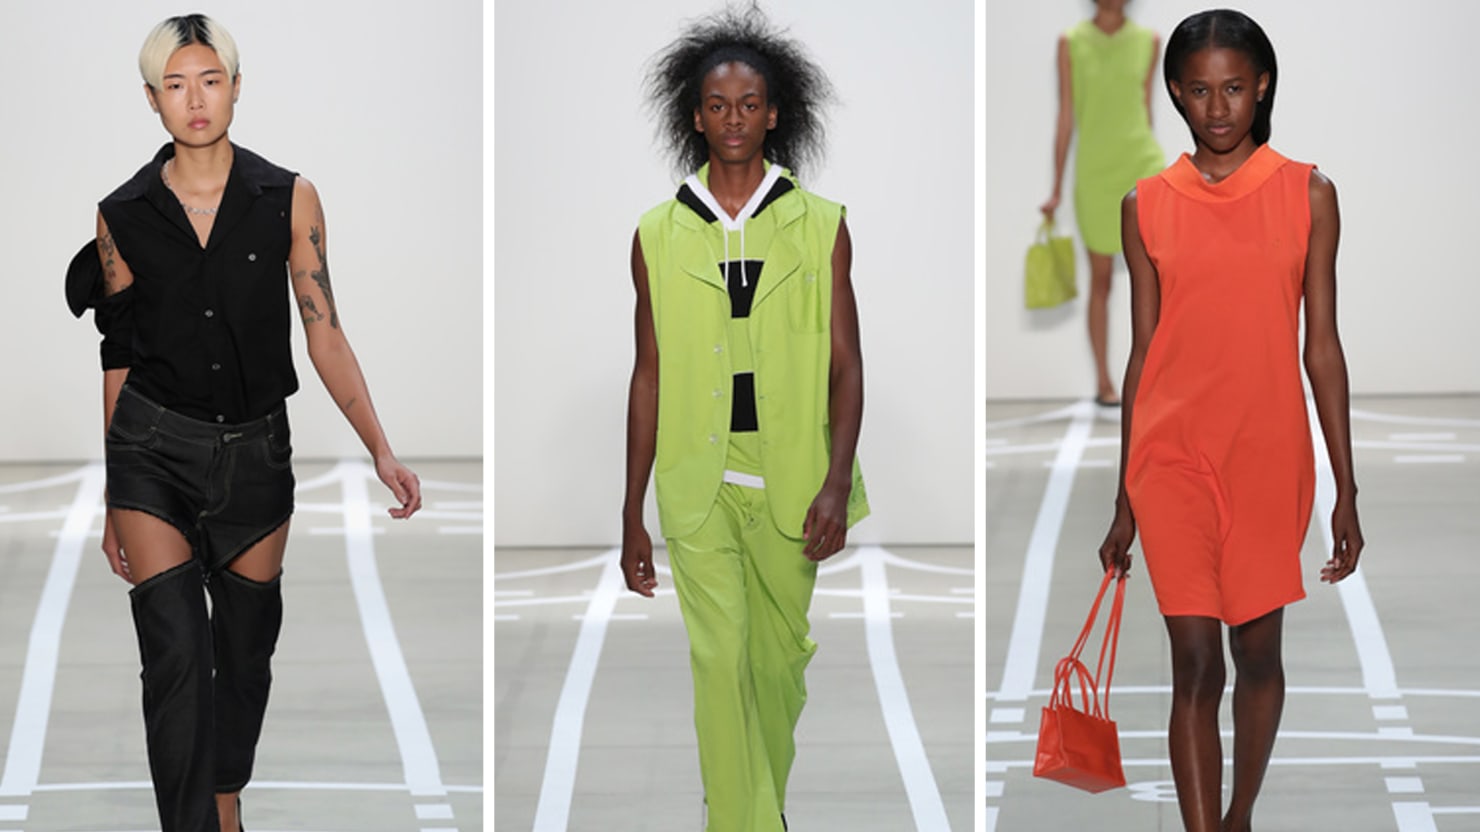 There’s ‘Male,’ ‘Female,’ and Telfar: NYFW’s Gender Boundary Blurring ...